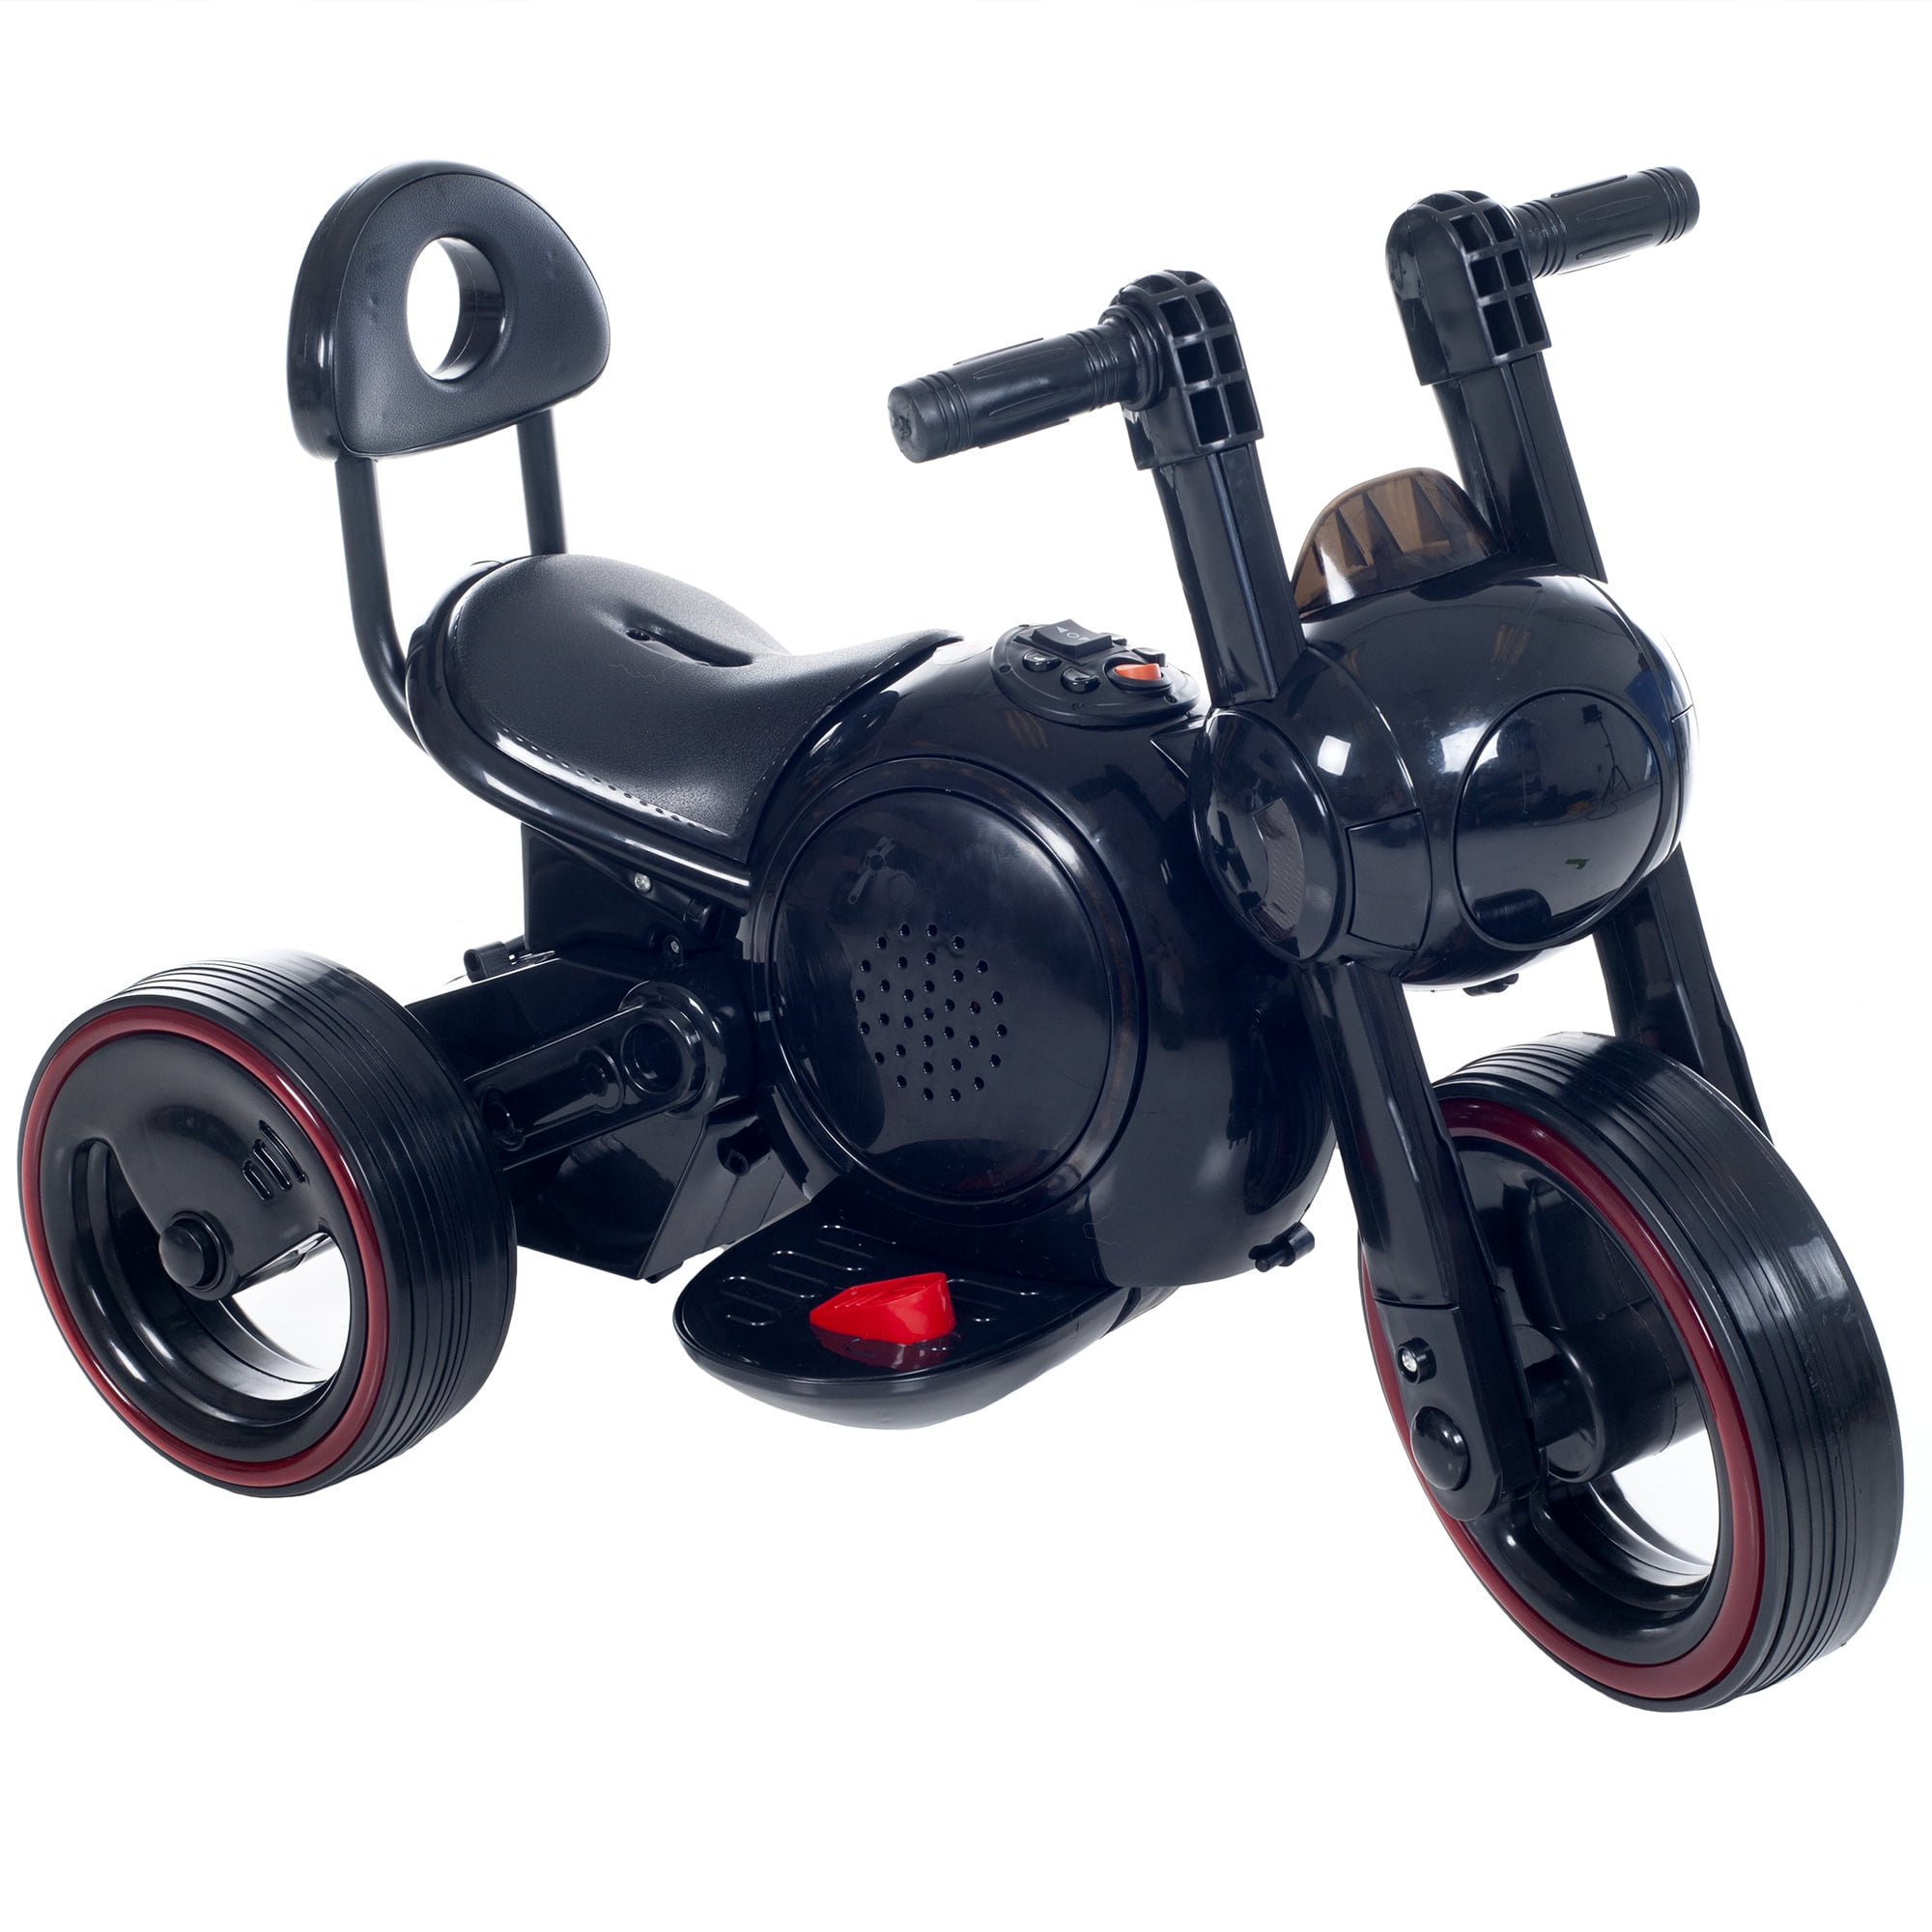 Ride on Toy 3 Wheel Motorcycle Trike for Kids by Rockin Rollers Battery PO for sale online 